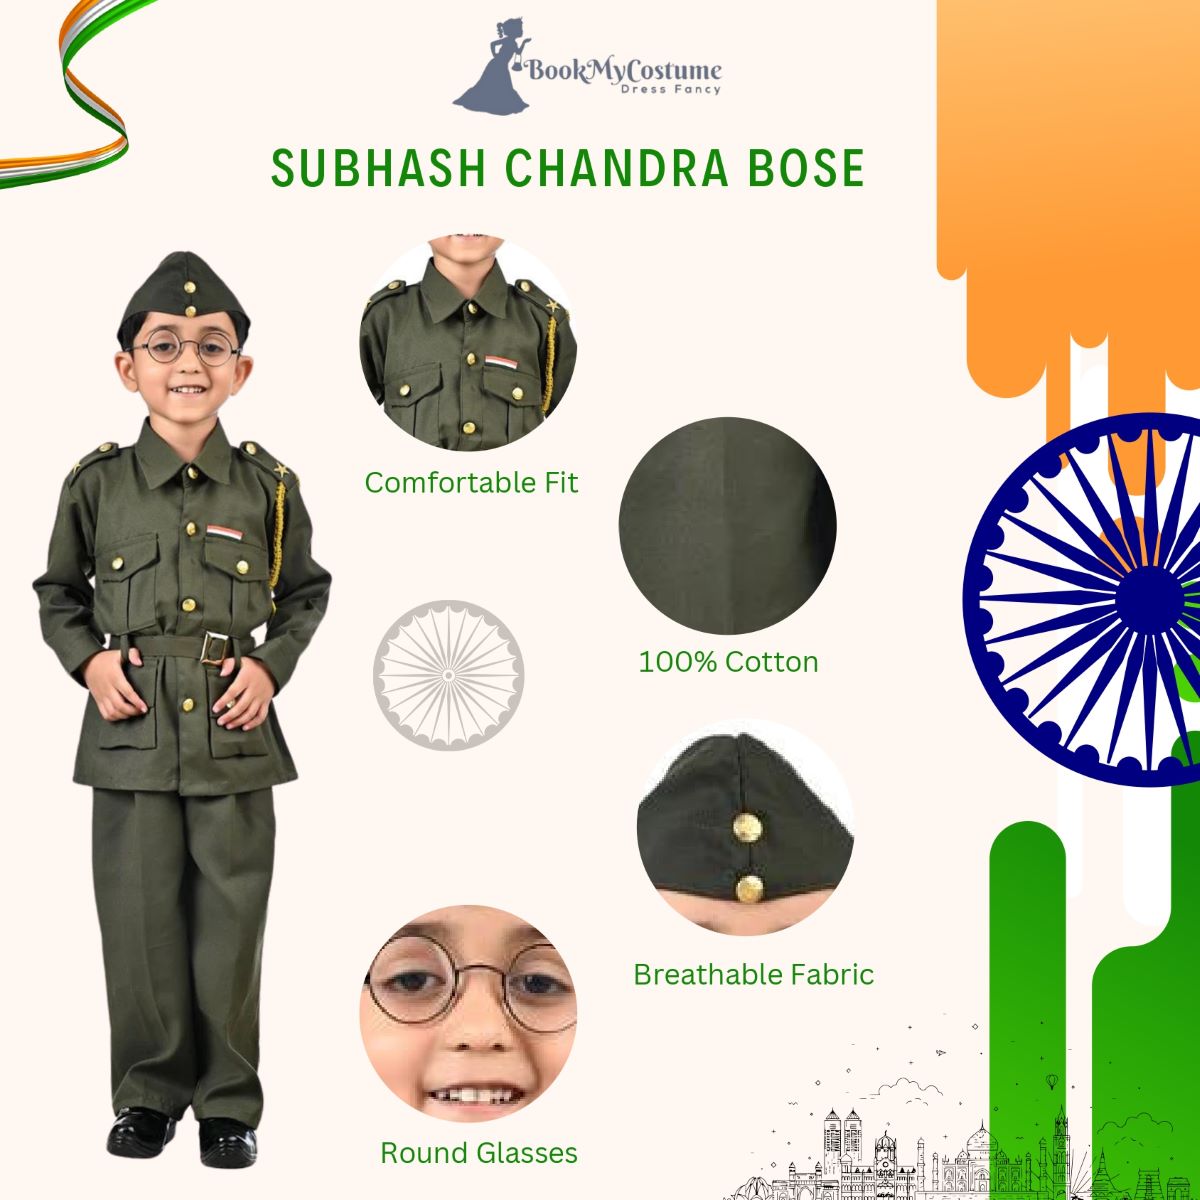 Fancy dress competition || Subhash Chandra Bose || Indian freedom fighters  getup || anvidishaan - YouTube